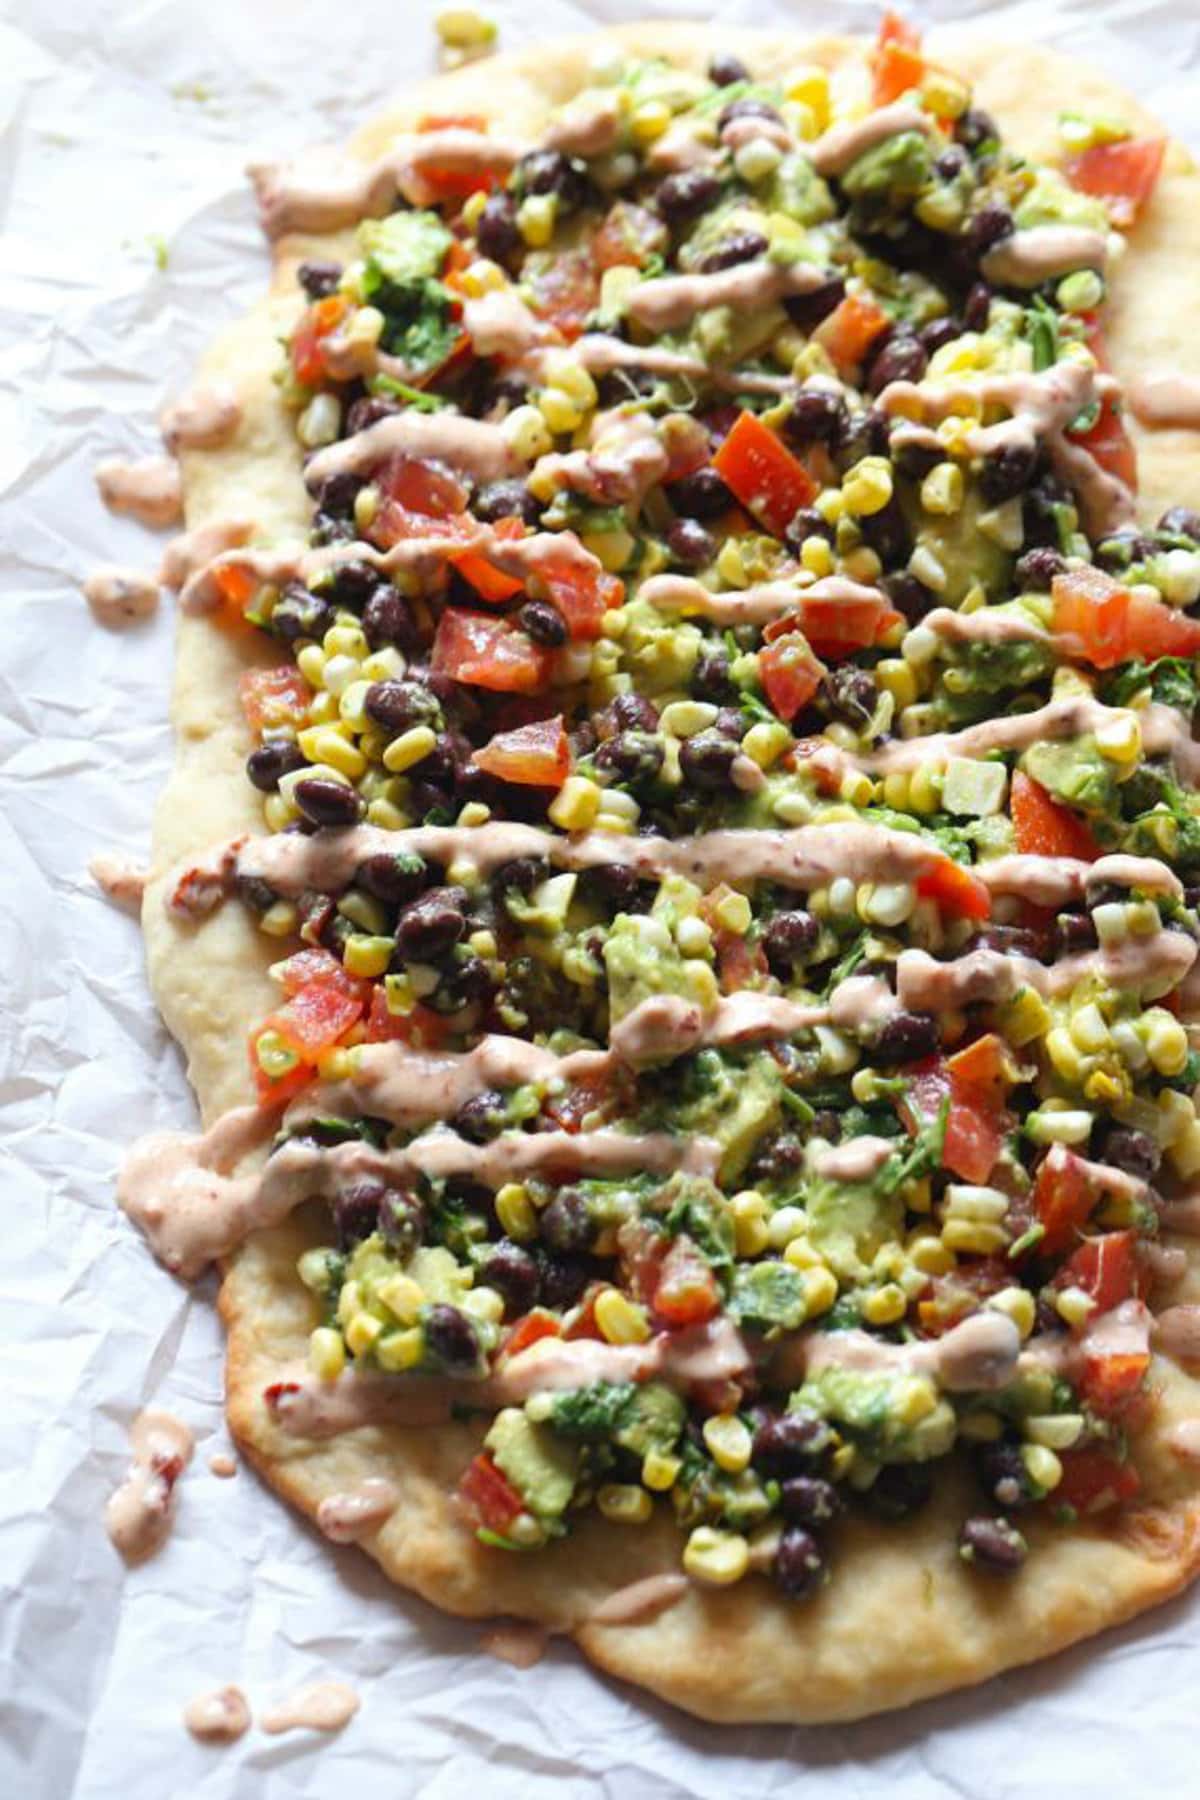 Cowboy Caviar Pizza served to eat